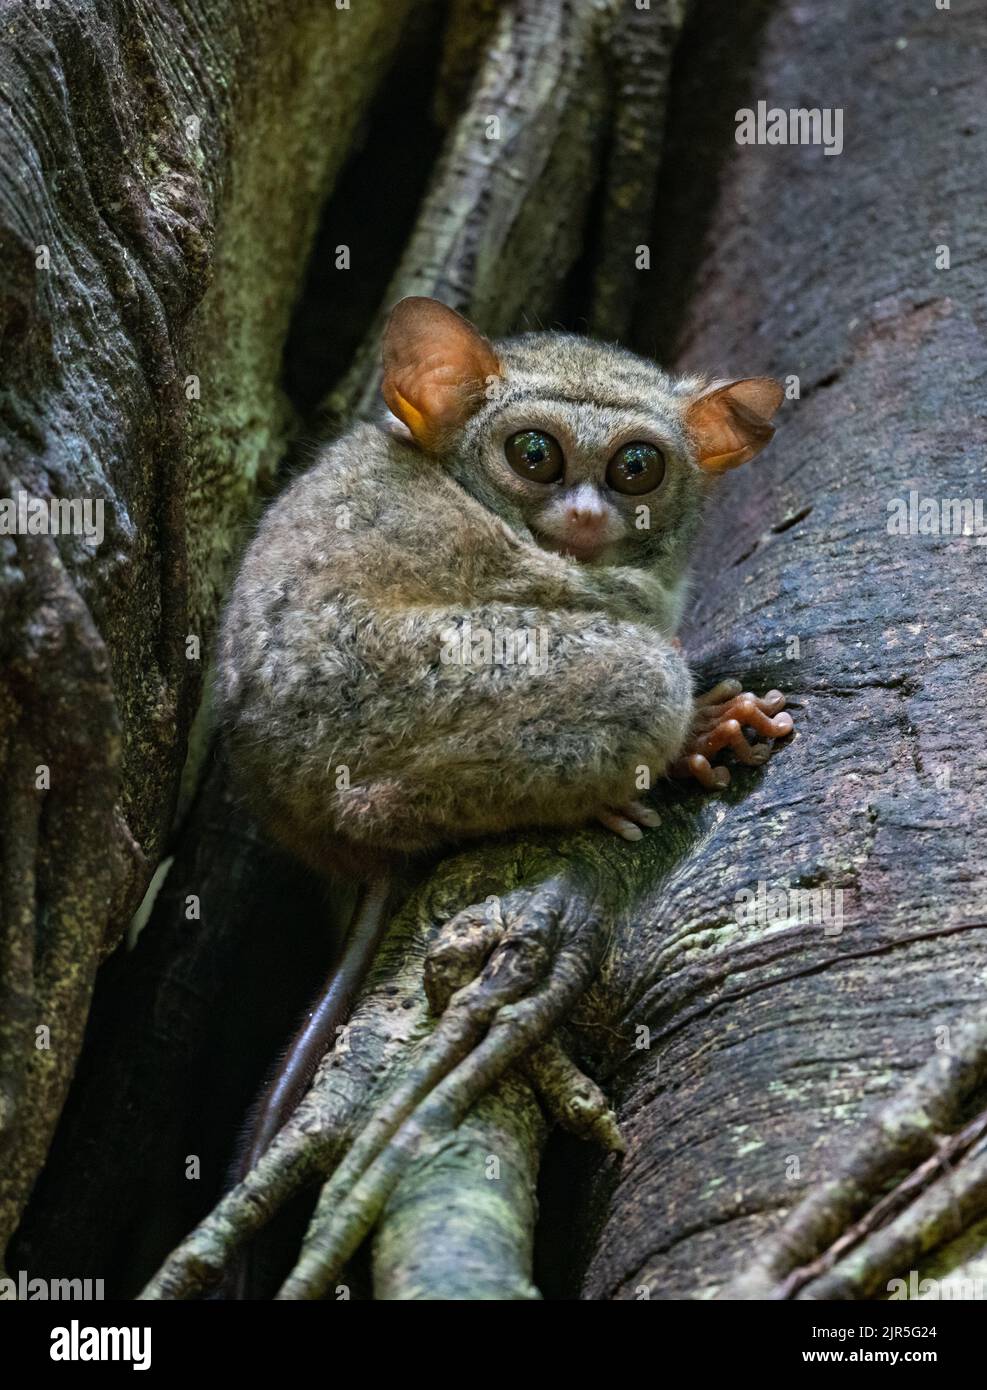 A small primate Spectral Tarsier (Tarsius spectrum) sitting on a tree trunk in the wild.  Tangkoko National Park, Sulawesi, Indonesia. Stock Photo